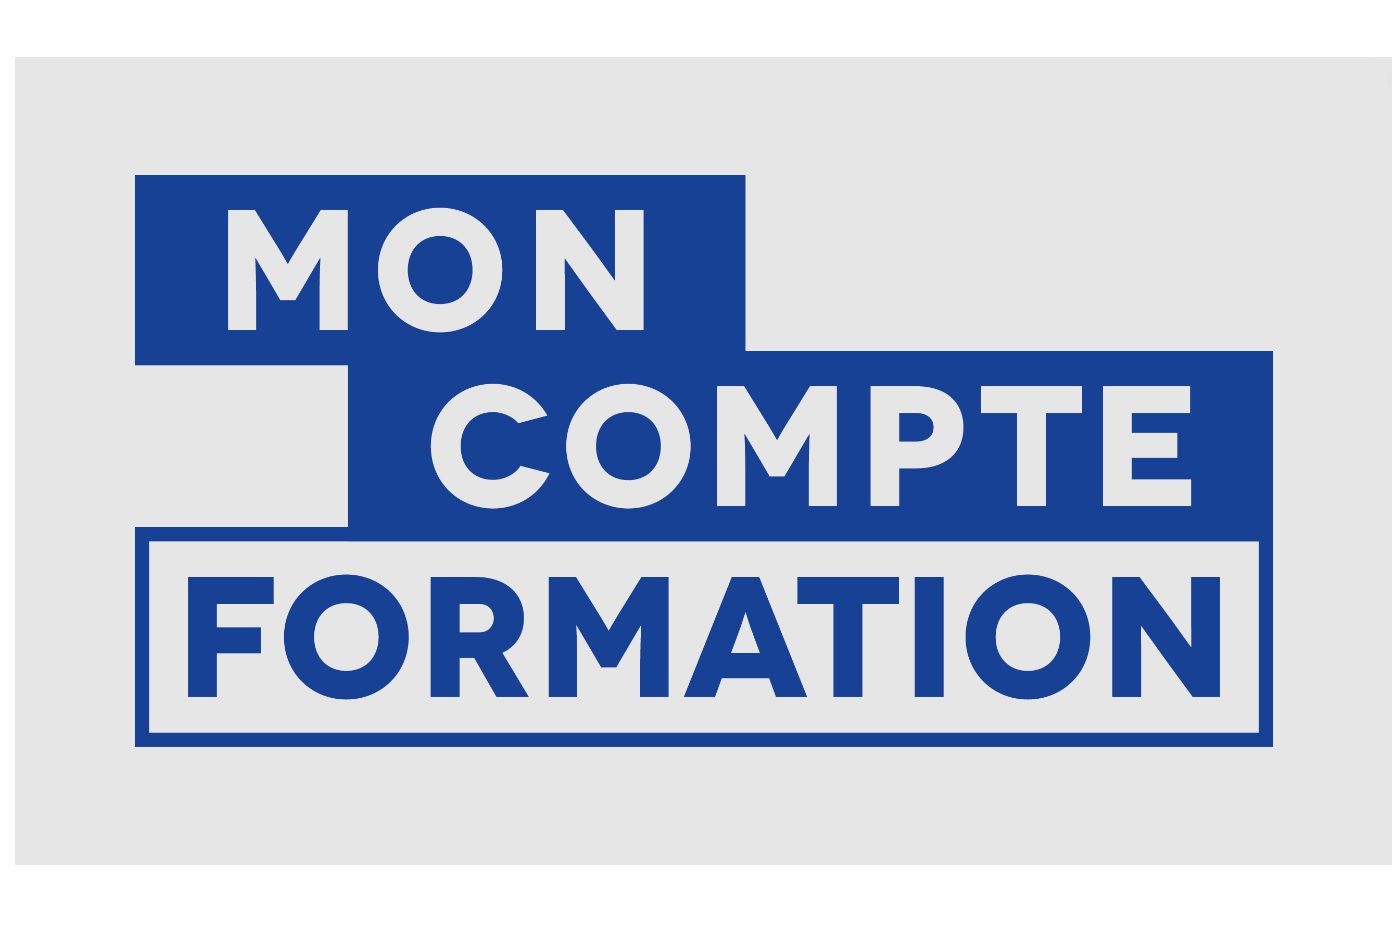 MEA compte formation